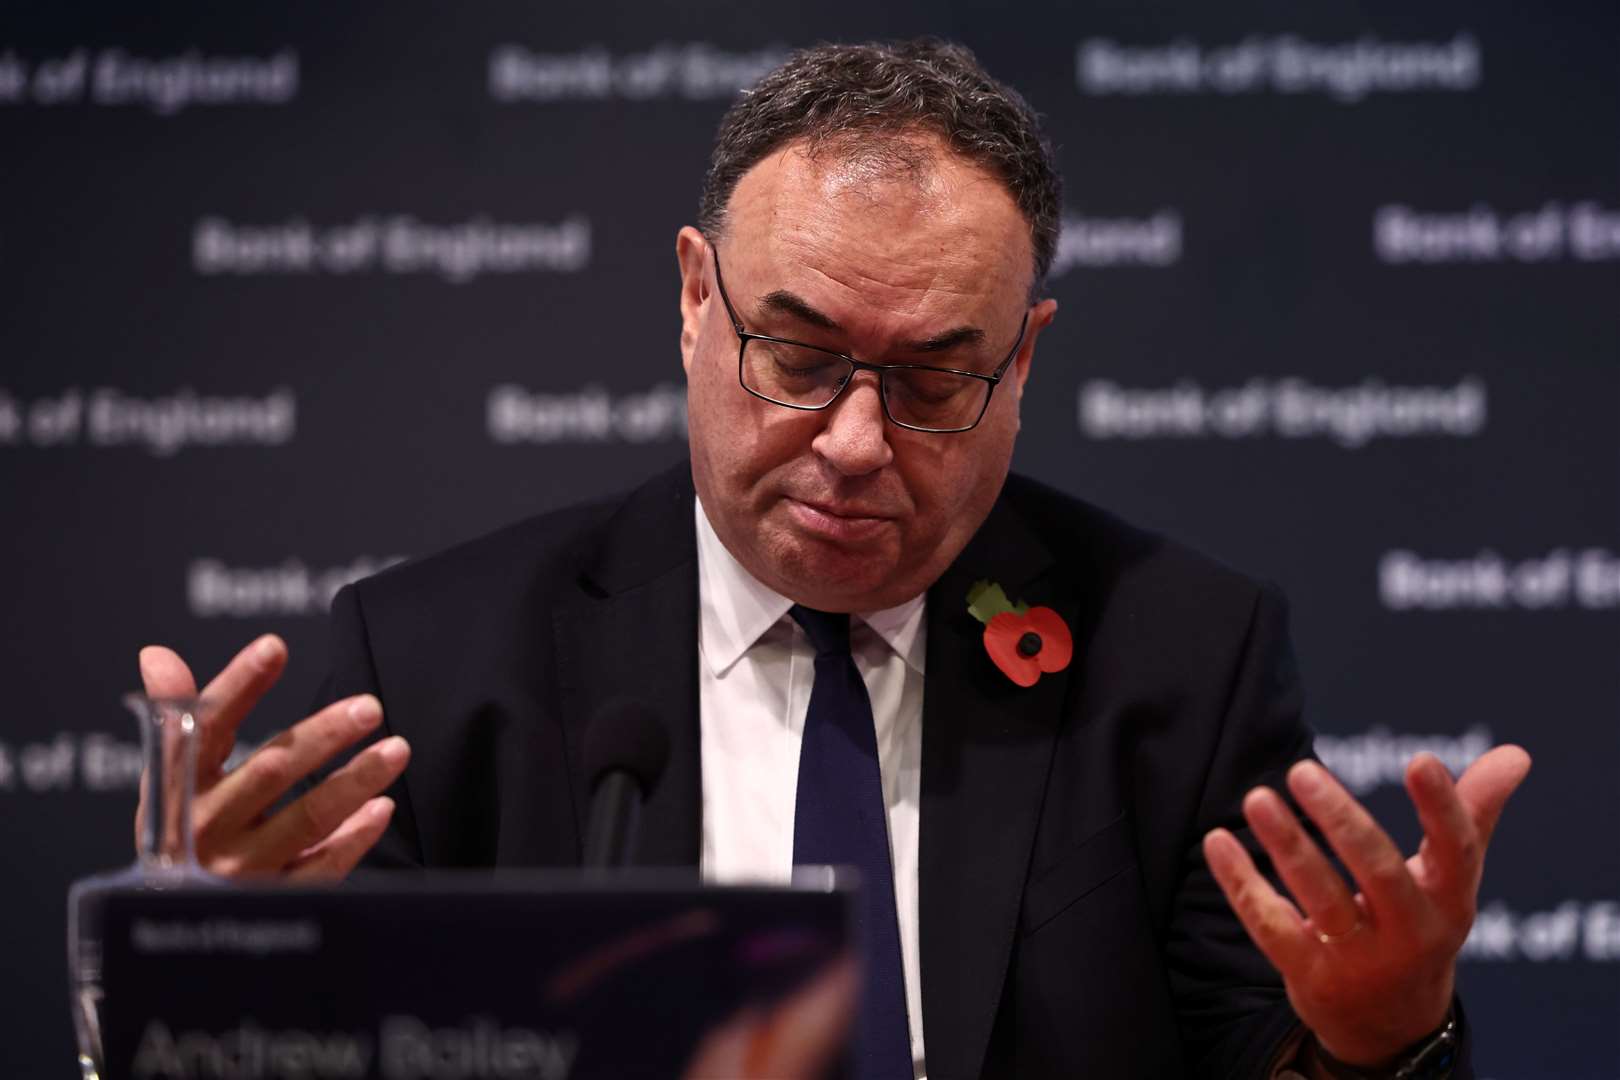 Andrew Bailey, Governor of the Bank of England, recently said potential growth in the UK economy was among the worst he had seen in his lifetime (Henry Nicholls/PA)